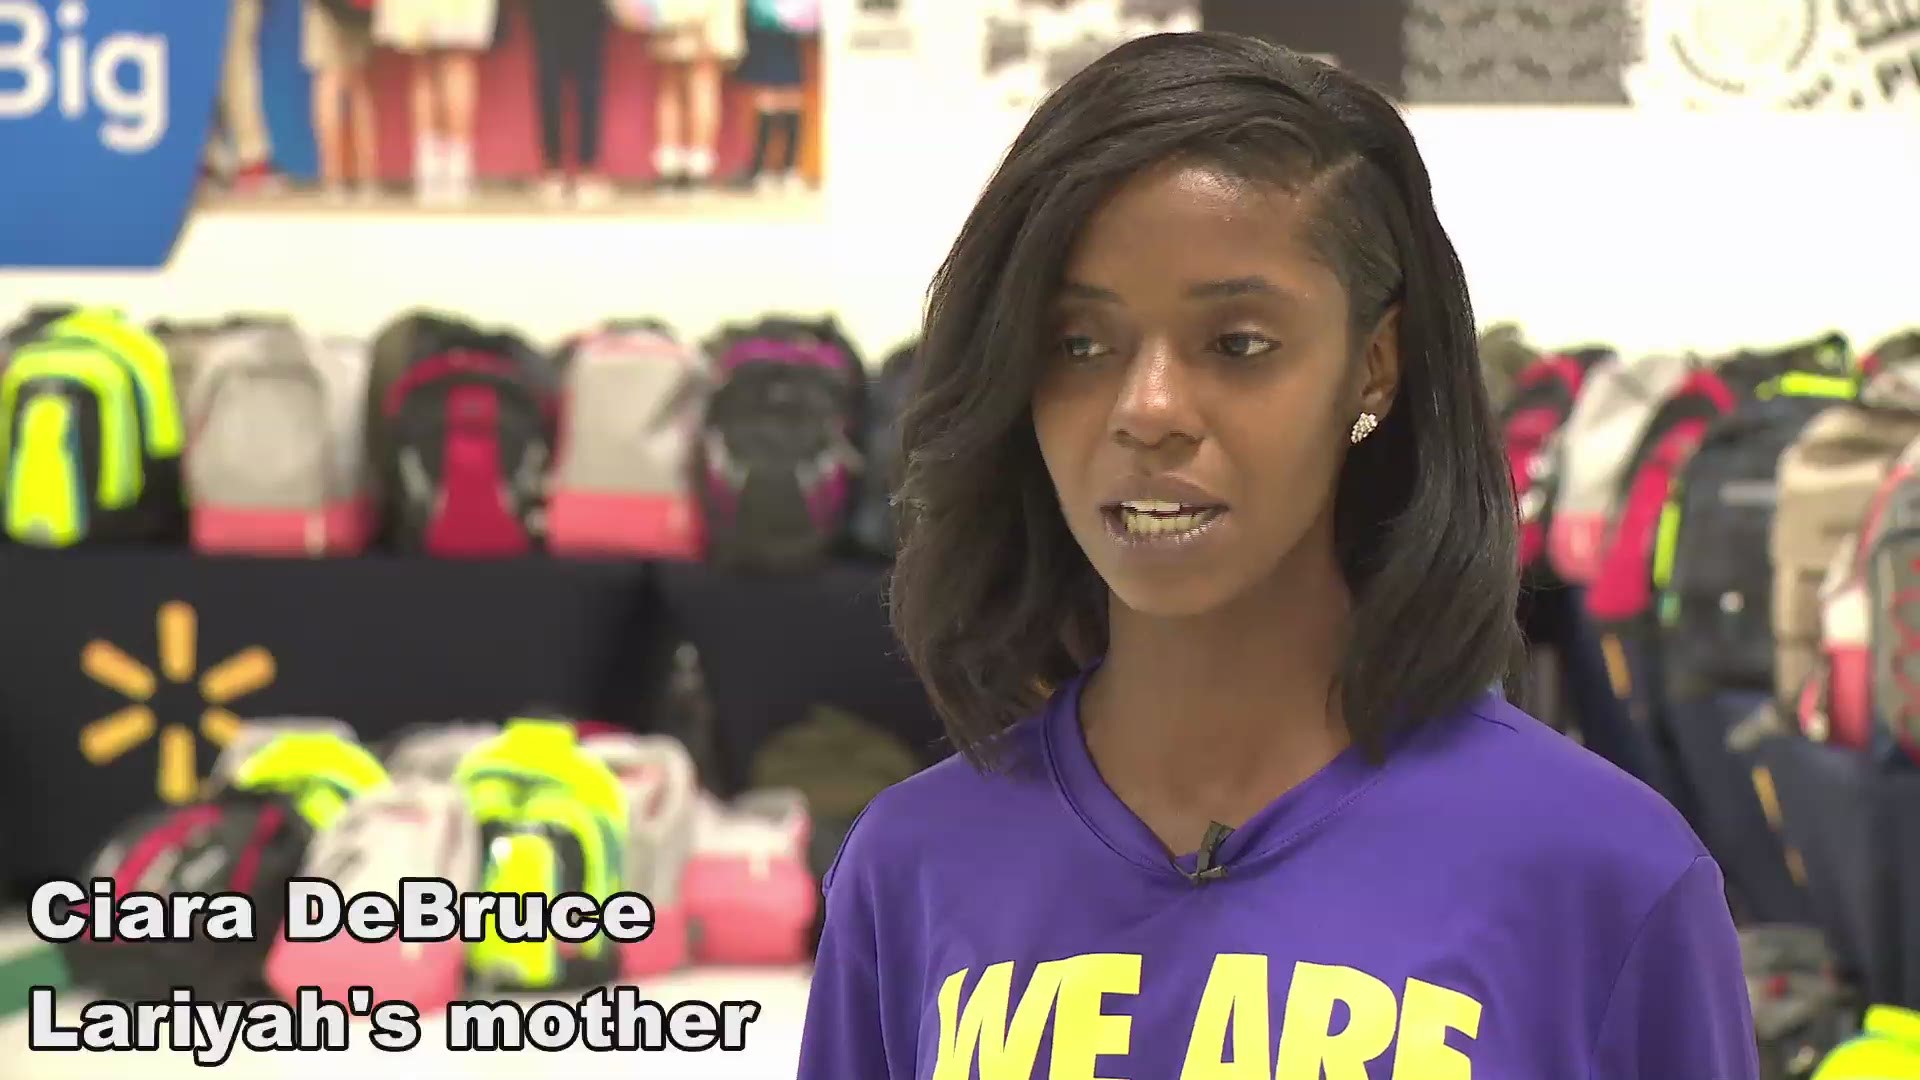 Ciara DeBruce discusses her daughter, Lariyah's, I PROMISE School shopping spree with the LeBron James Foundation and Walmart.